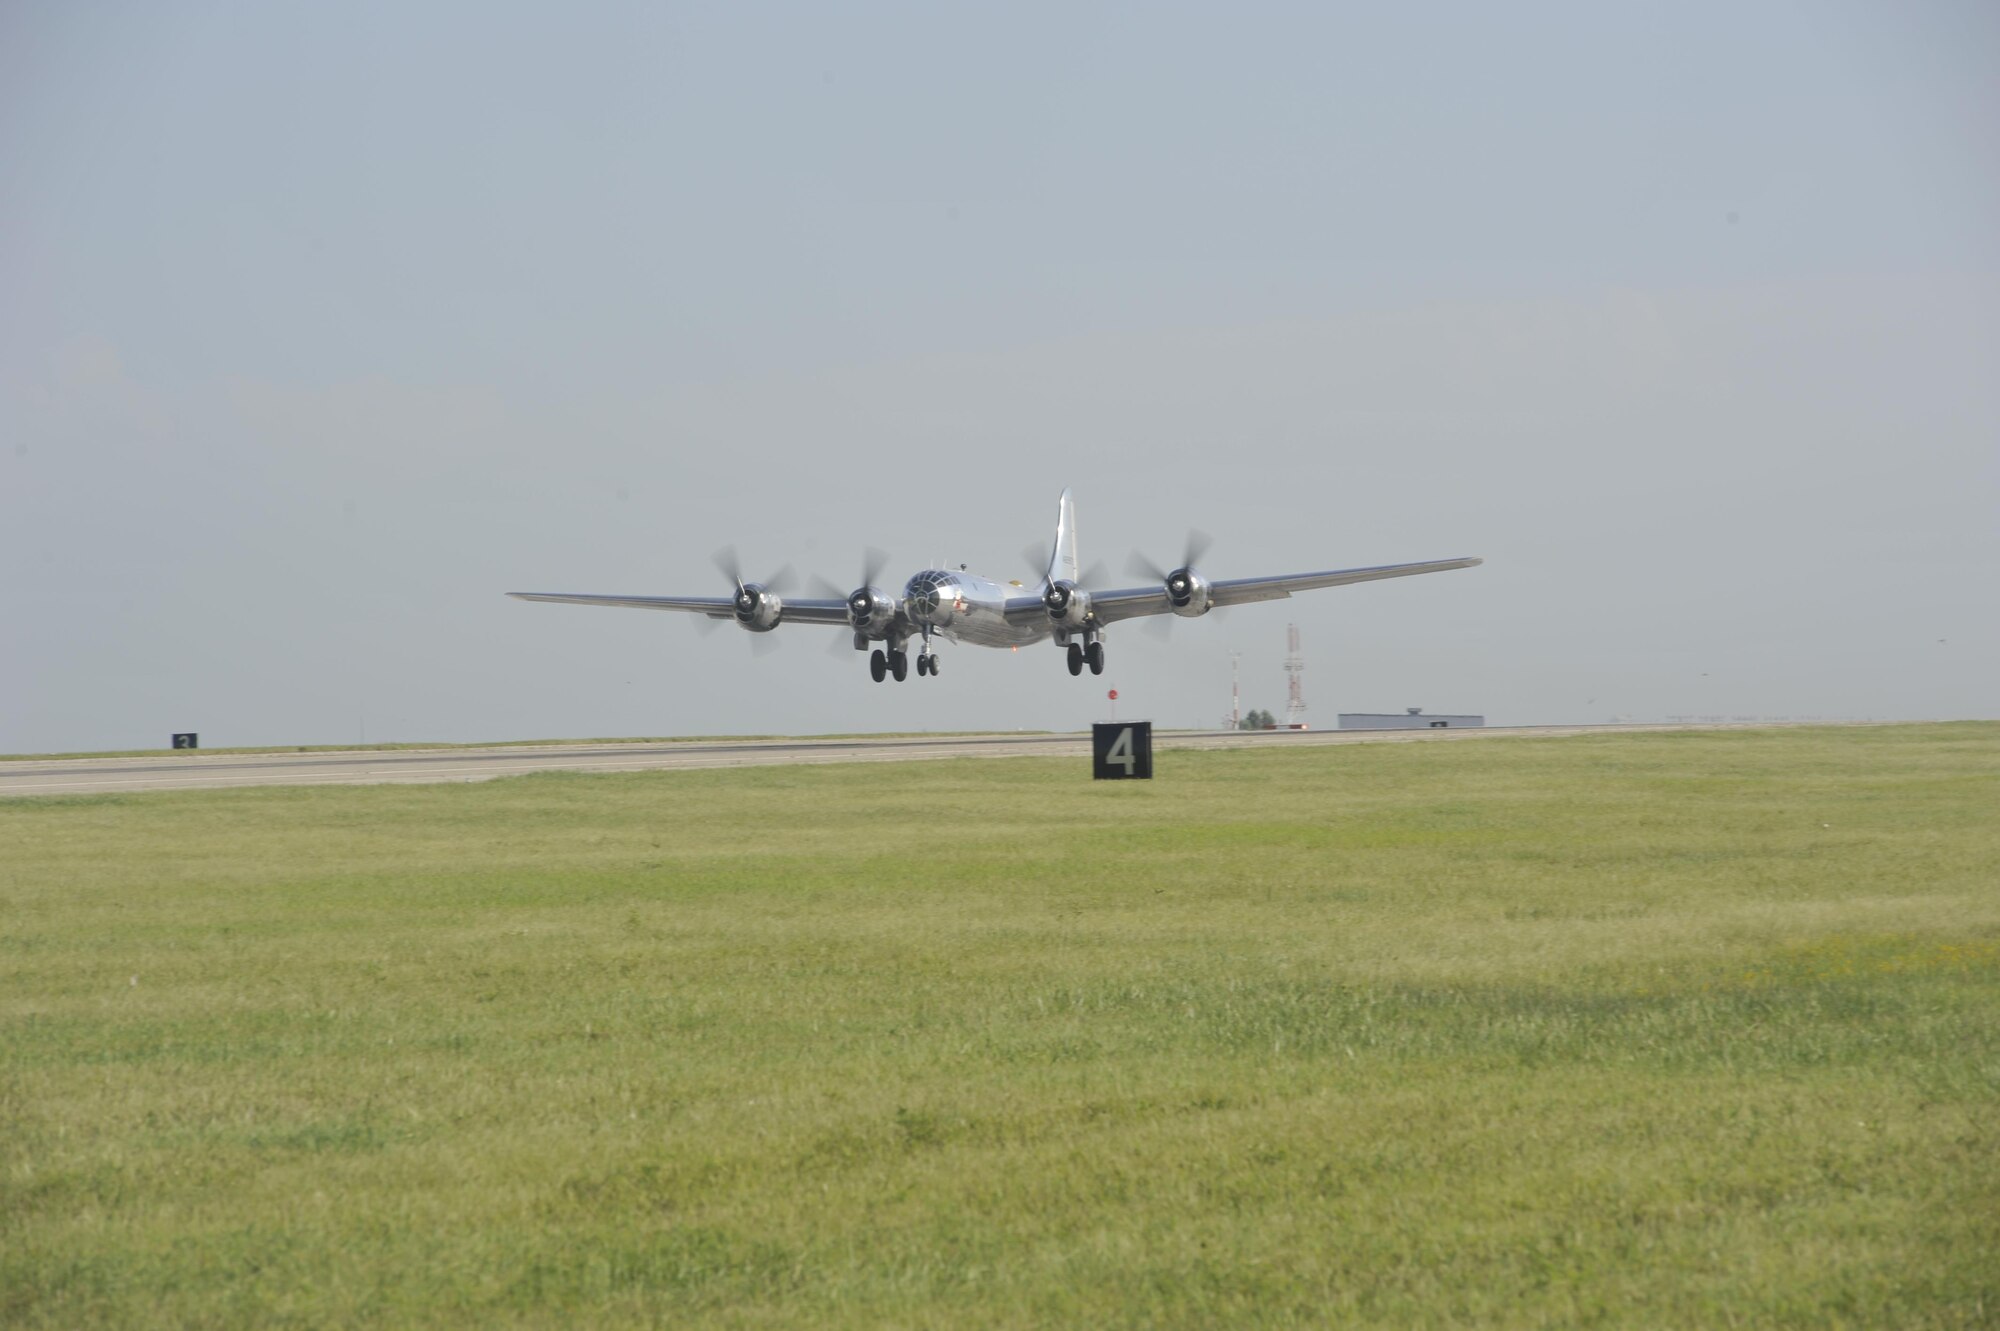 A B-29 Superfortress, known as ‘Doc,’ takes off for the first time in approximately 60 years, July 17, 2016, at McConnell Air Force Base, Kan. A restoration team worked on the aircraft for the last 16 years to prepare it for flight. (U.S Air Force photo/)